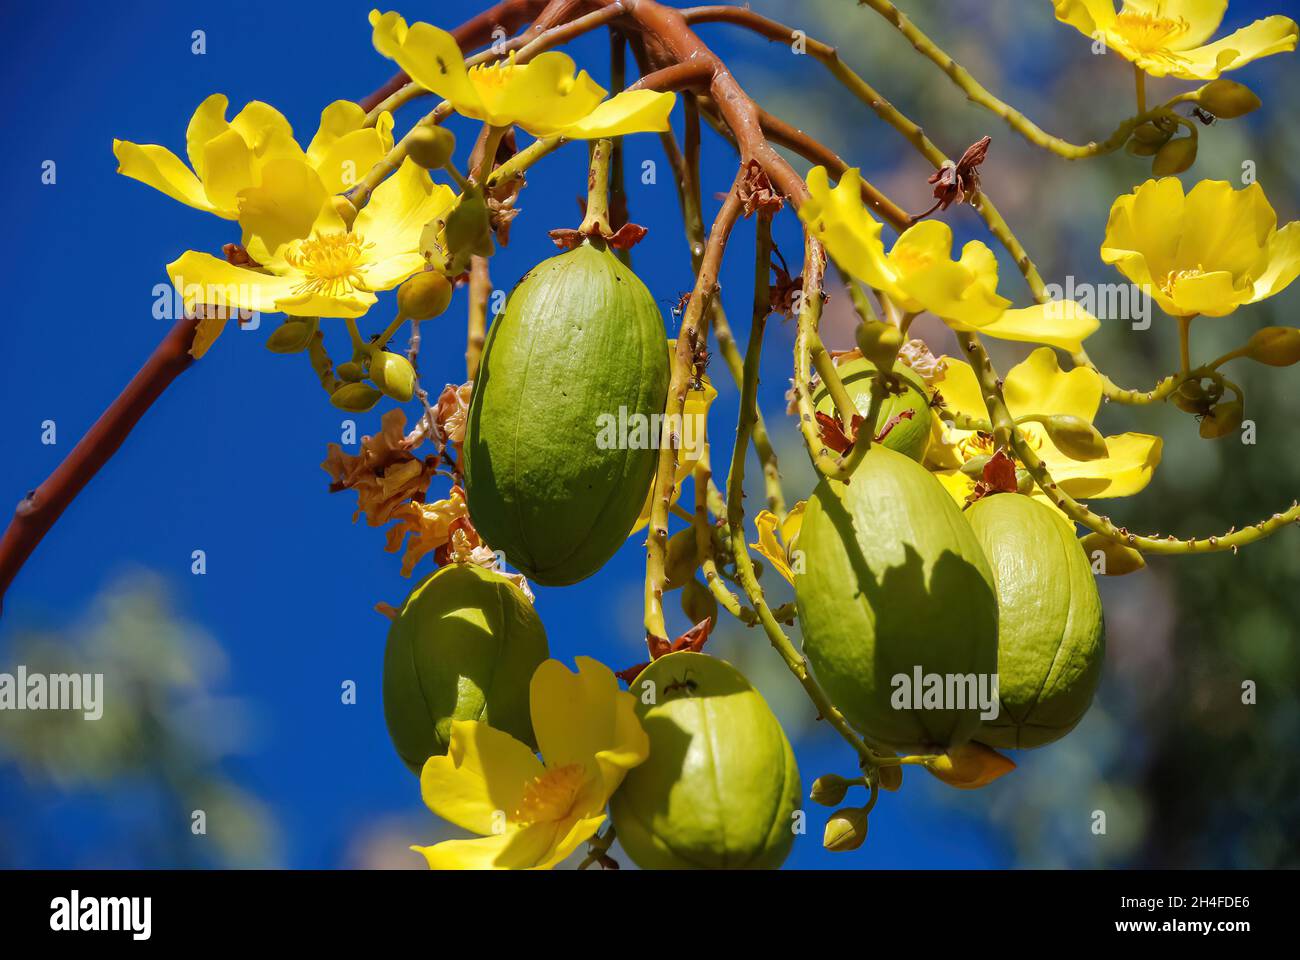 Close up view of the yellow flowers of the Cochlospermum or buttercup tree or silk cotton tree in bloom with some buds still unopened Stock Photo